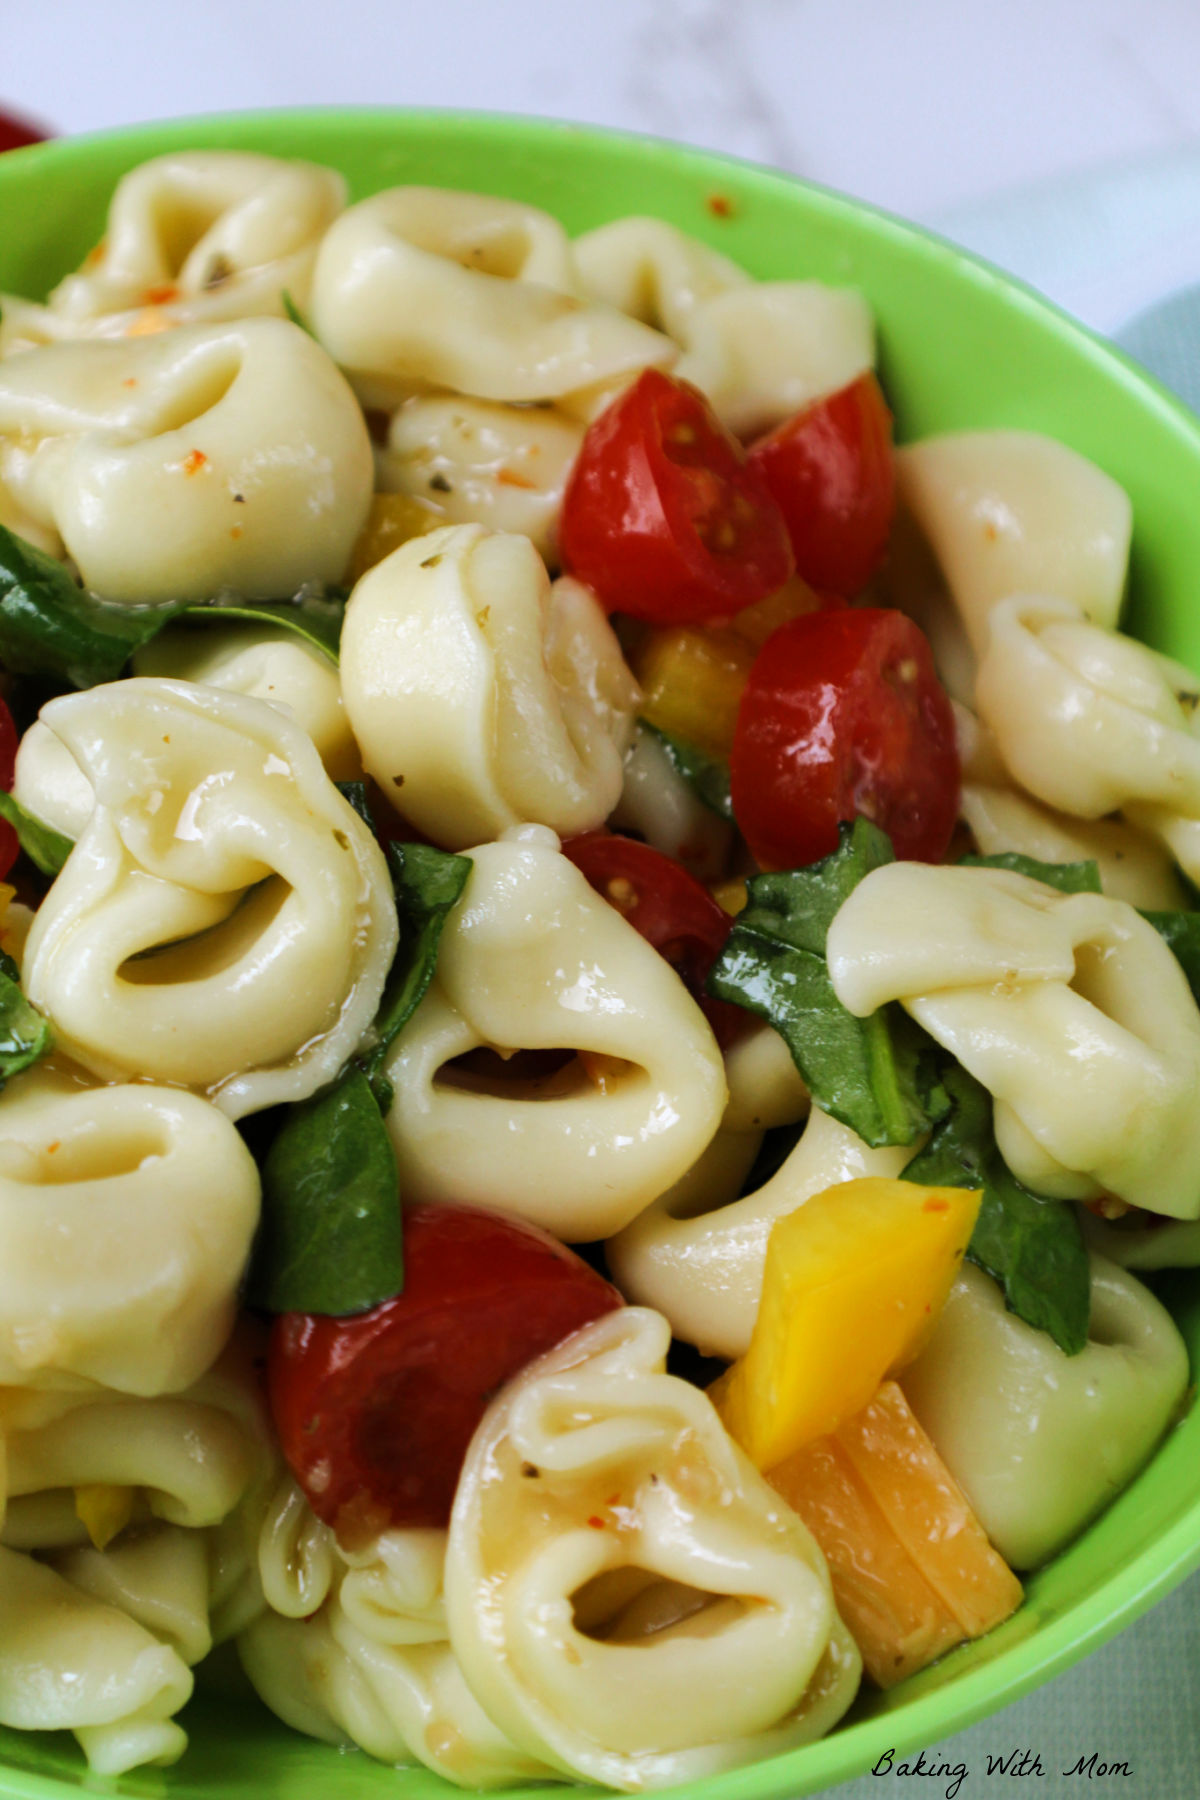 Bowl of tortellini salad with tomatoes and spinach.